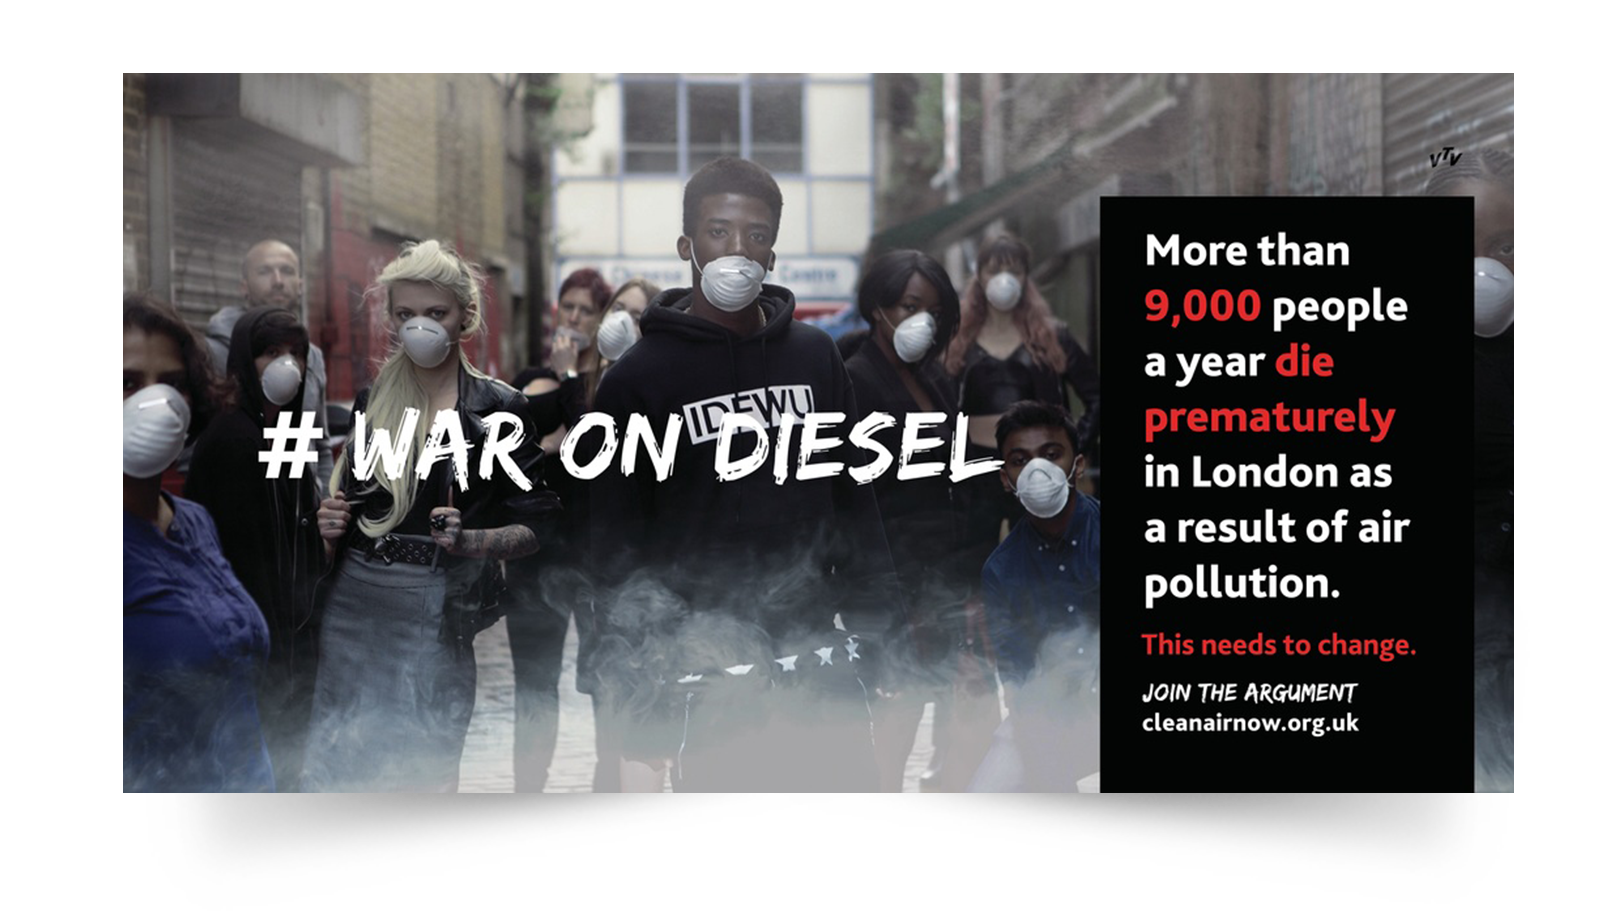 Billboard from the campaign using controversial hashtag | (by cleanairnow.org.uk)